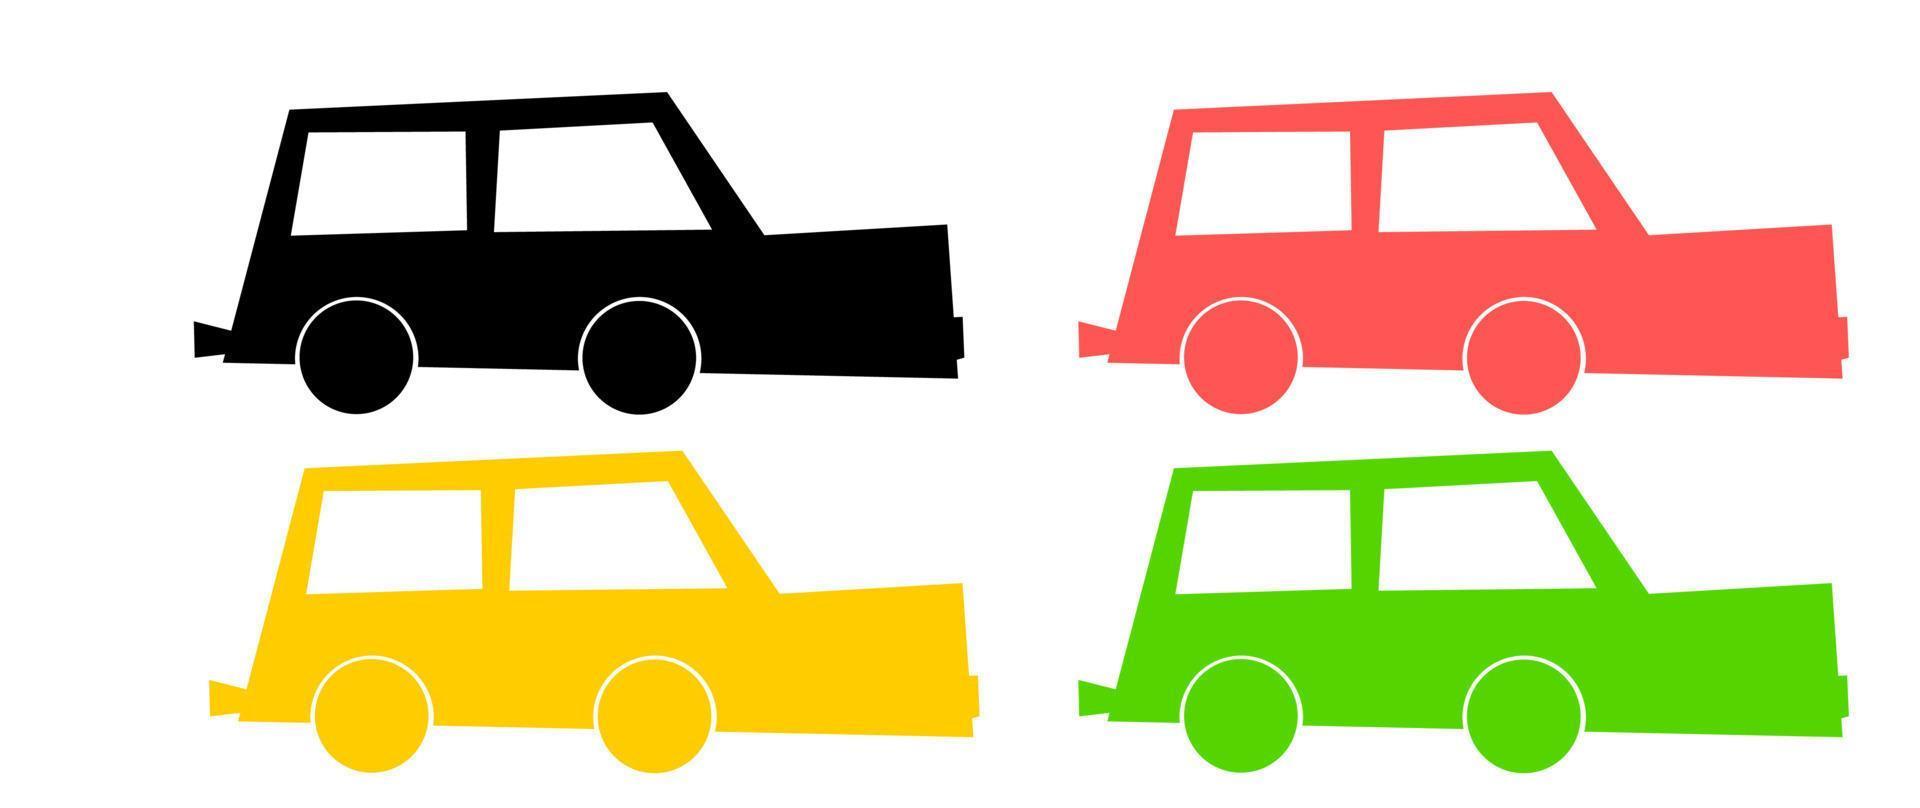 car icon. illustration of various models of cars vector